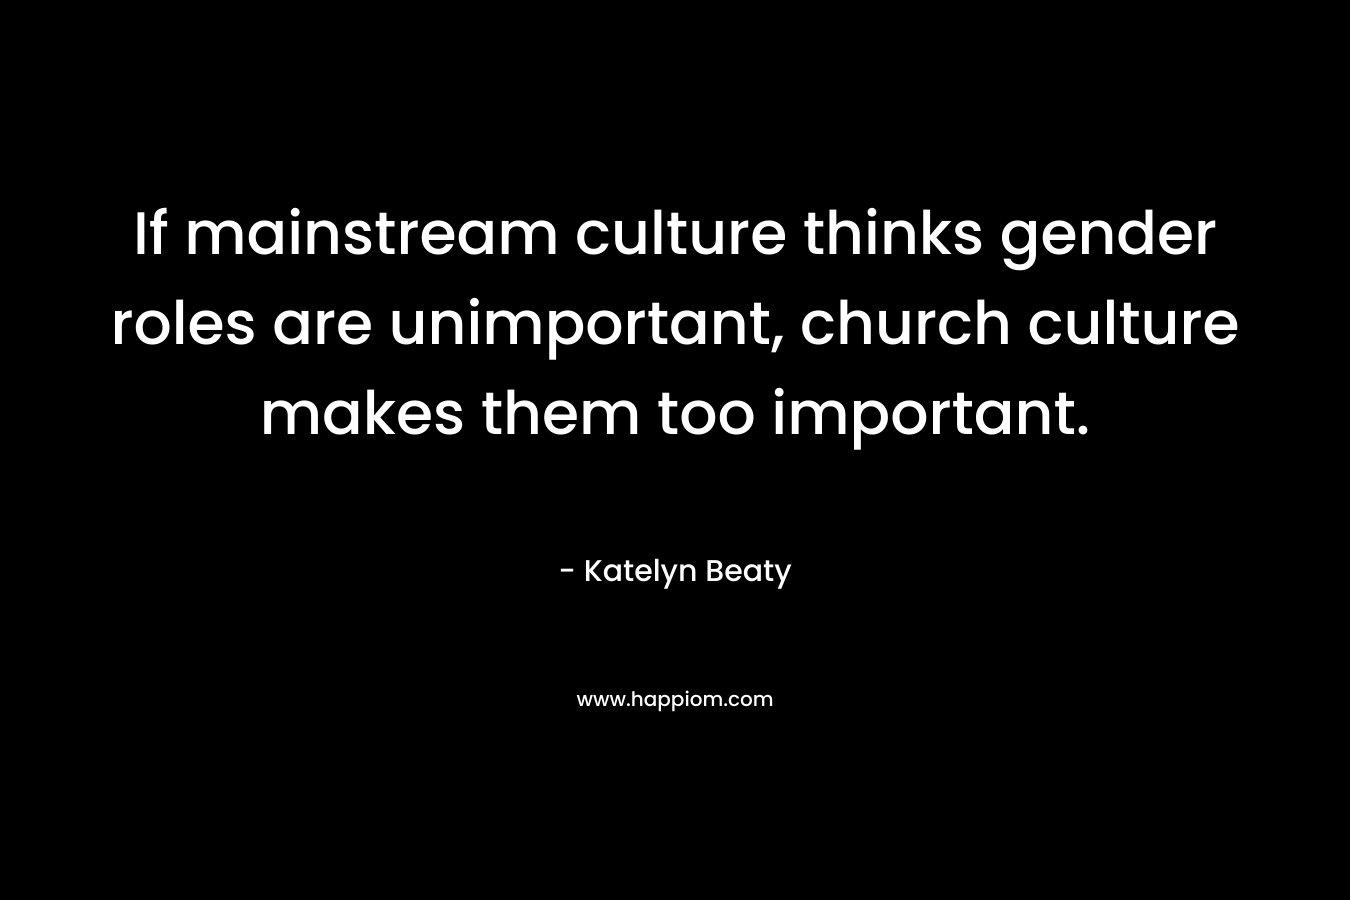 If mainstream culture thinks gender roles are unimportant, church culture makes them too important. – Katelyn Beaty